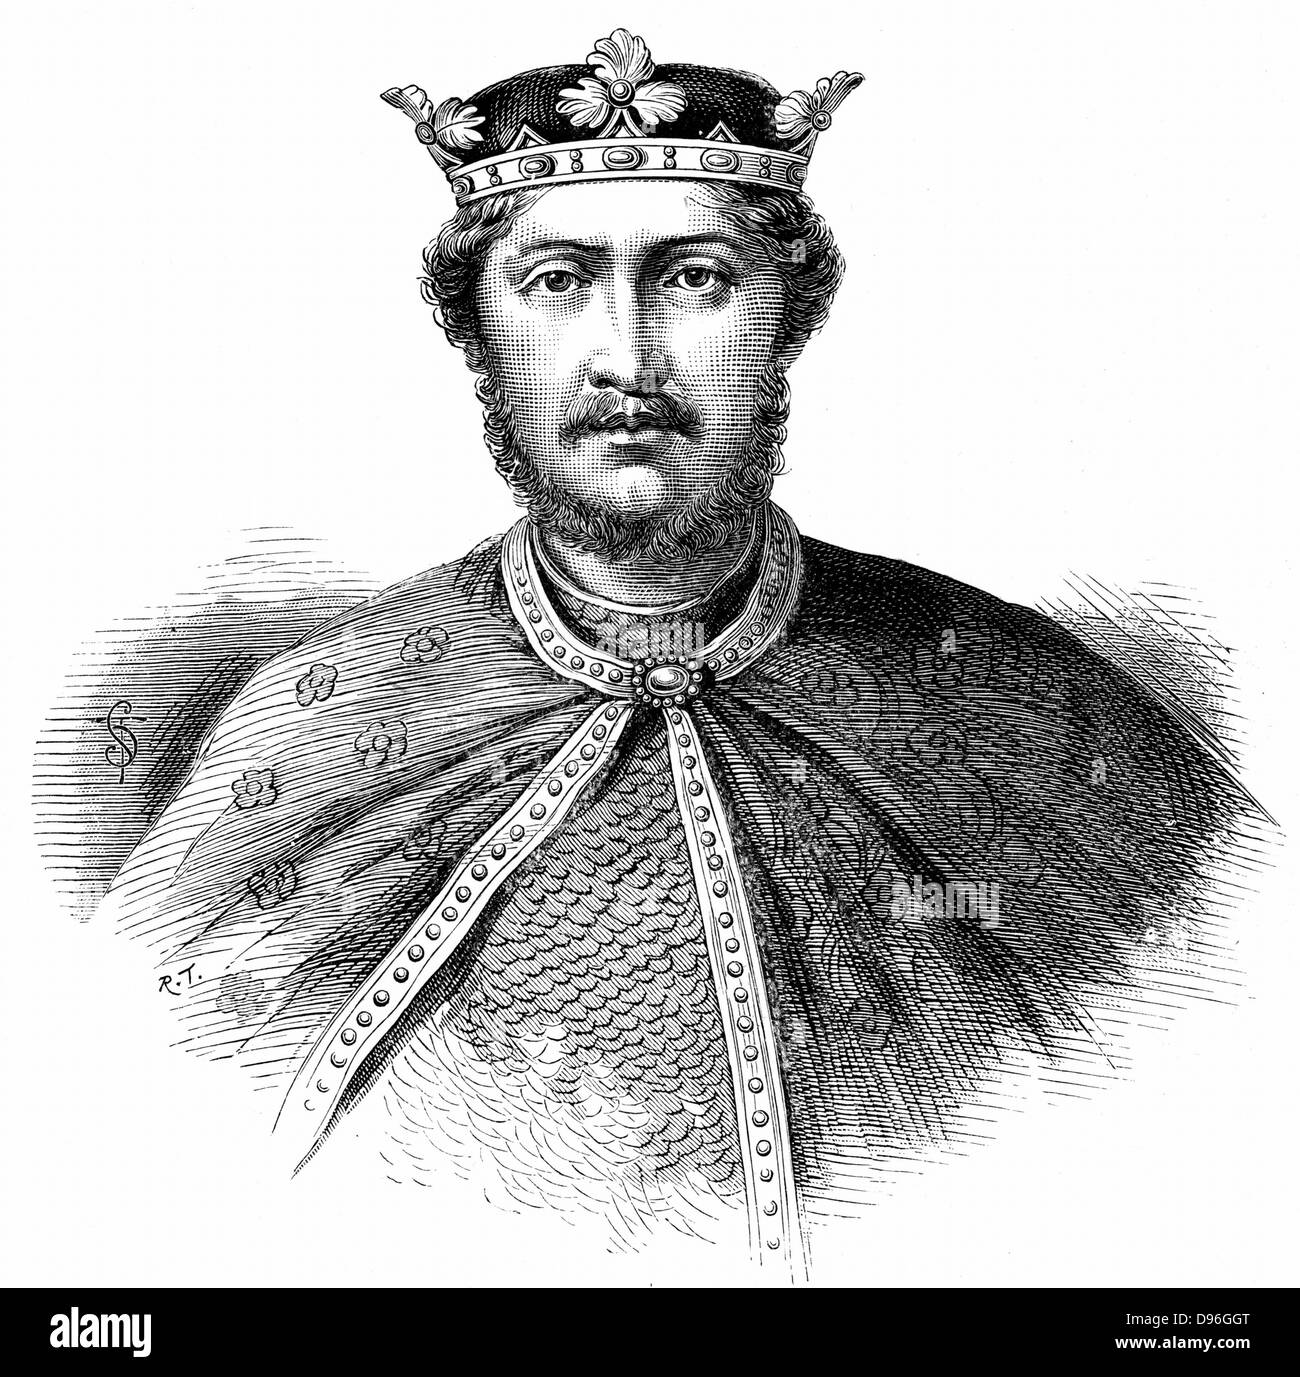 Richard I, Coeur de Lion, (1157-1199)  son of Henry II and Eleanor of Aquitaine, reigned as King of England (1189-1199). Second of the Angevin (Plantagenet) kings of England. Wood engraving c1880. Stock Photo